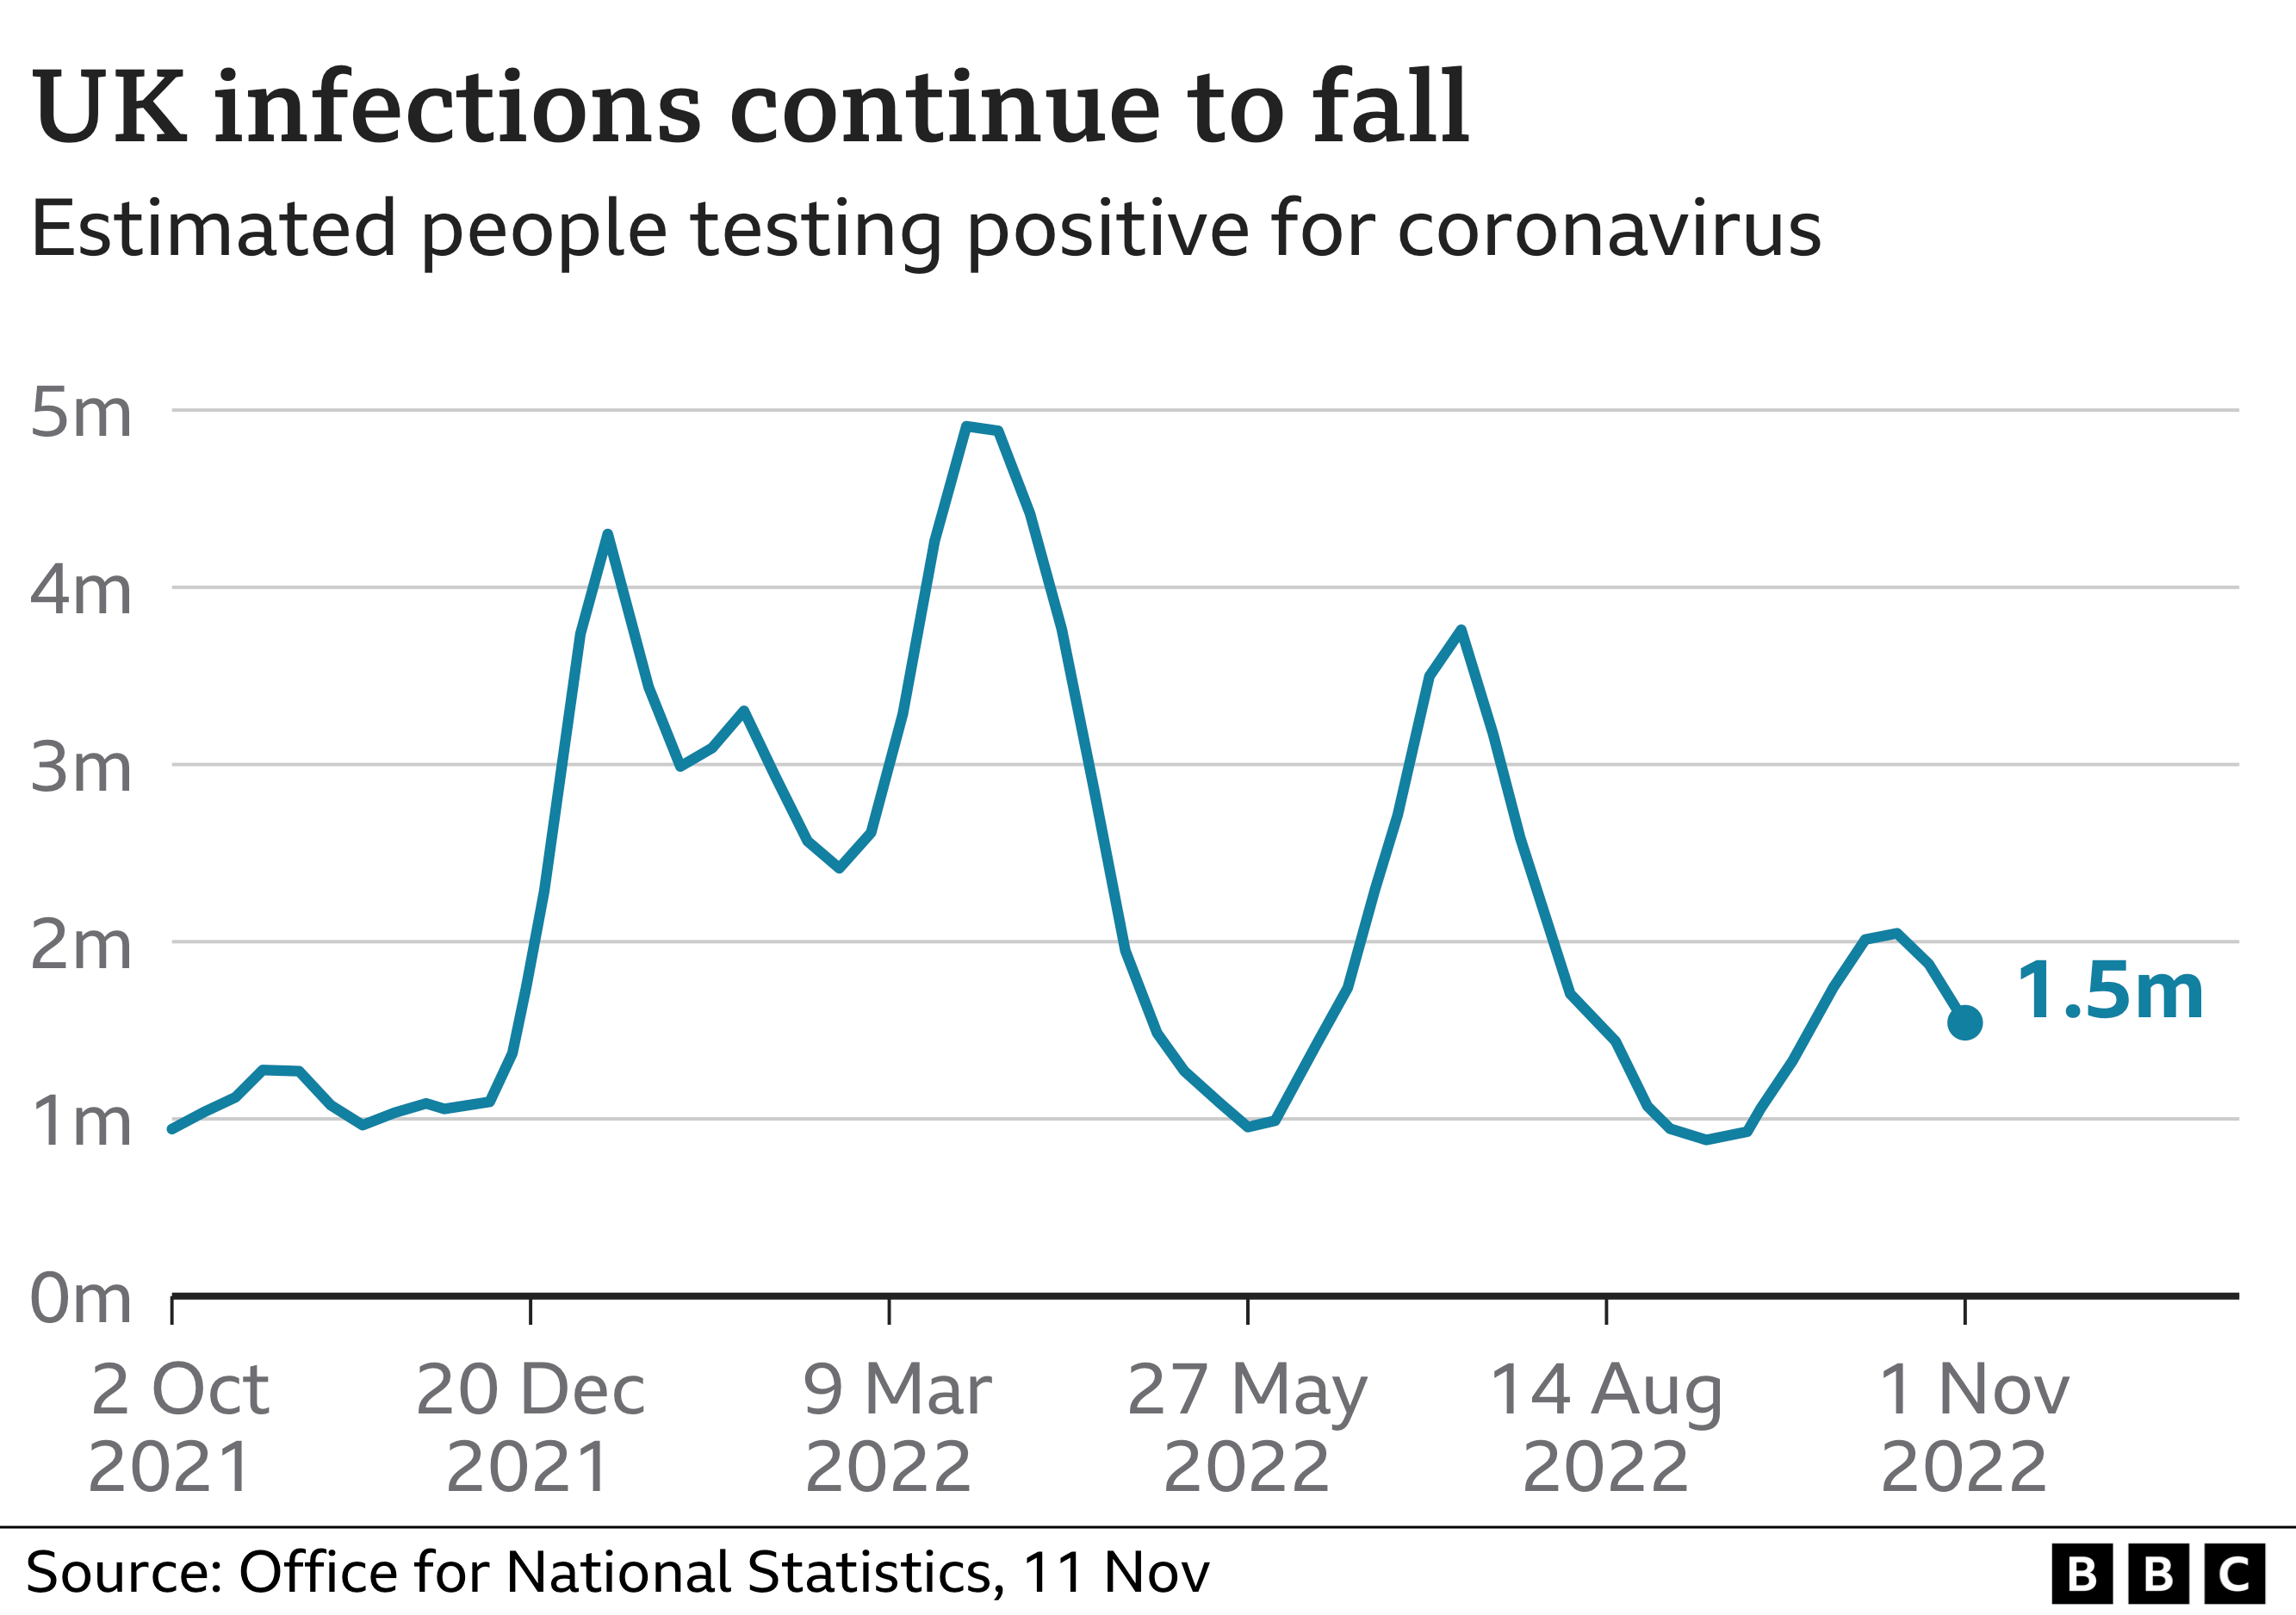 Graph of covid infections in the UK, showing a decrease in the past week ending 1 November 2022 to 1.5m. The latest value is lower than peaks in summer 2022, March 2022 and December 2021